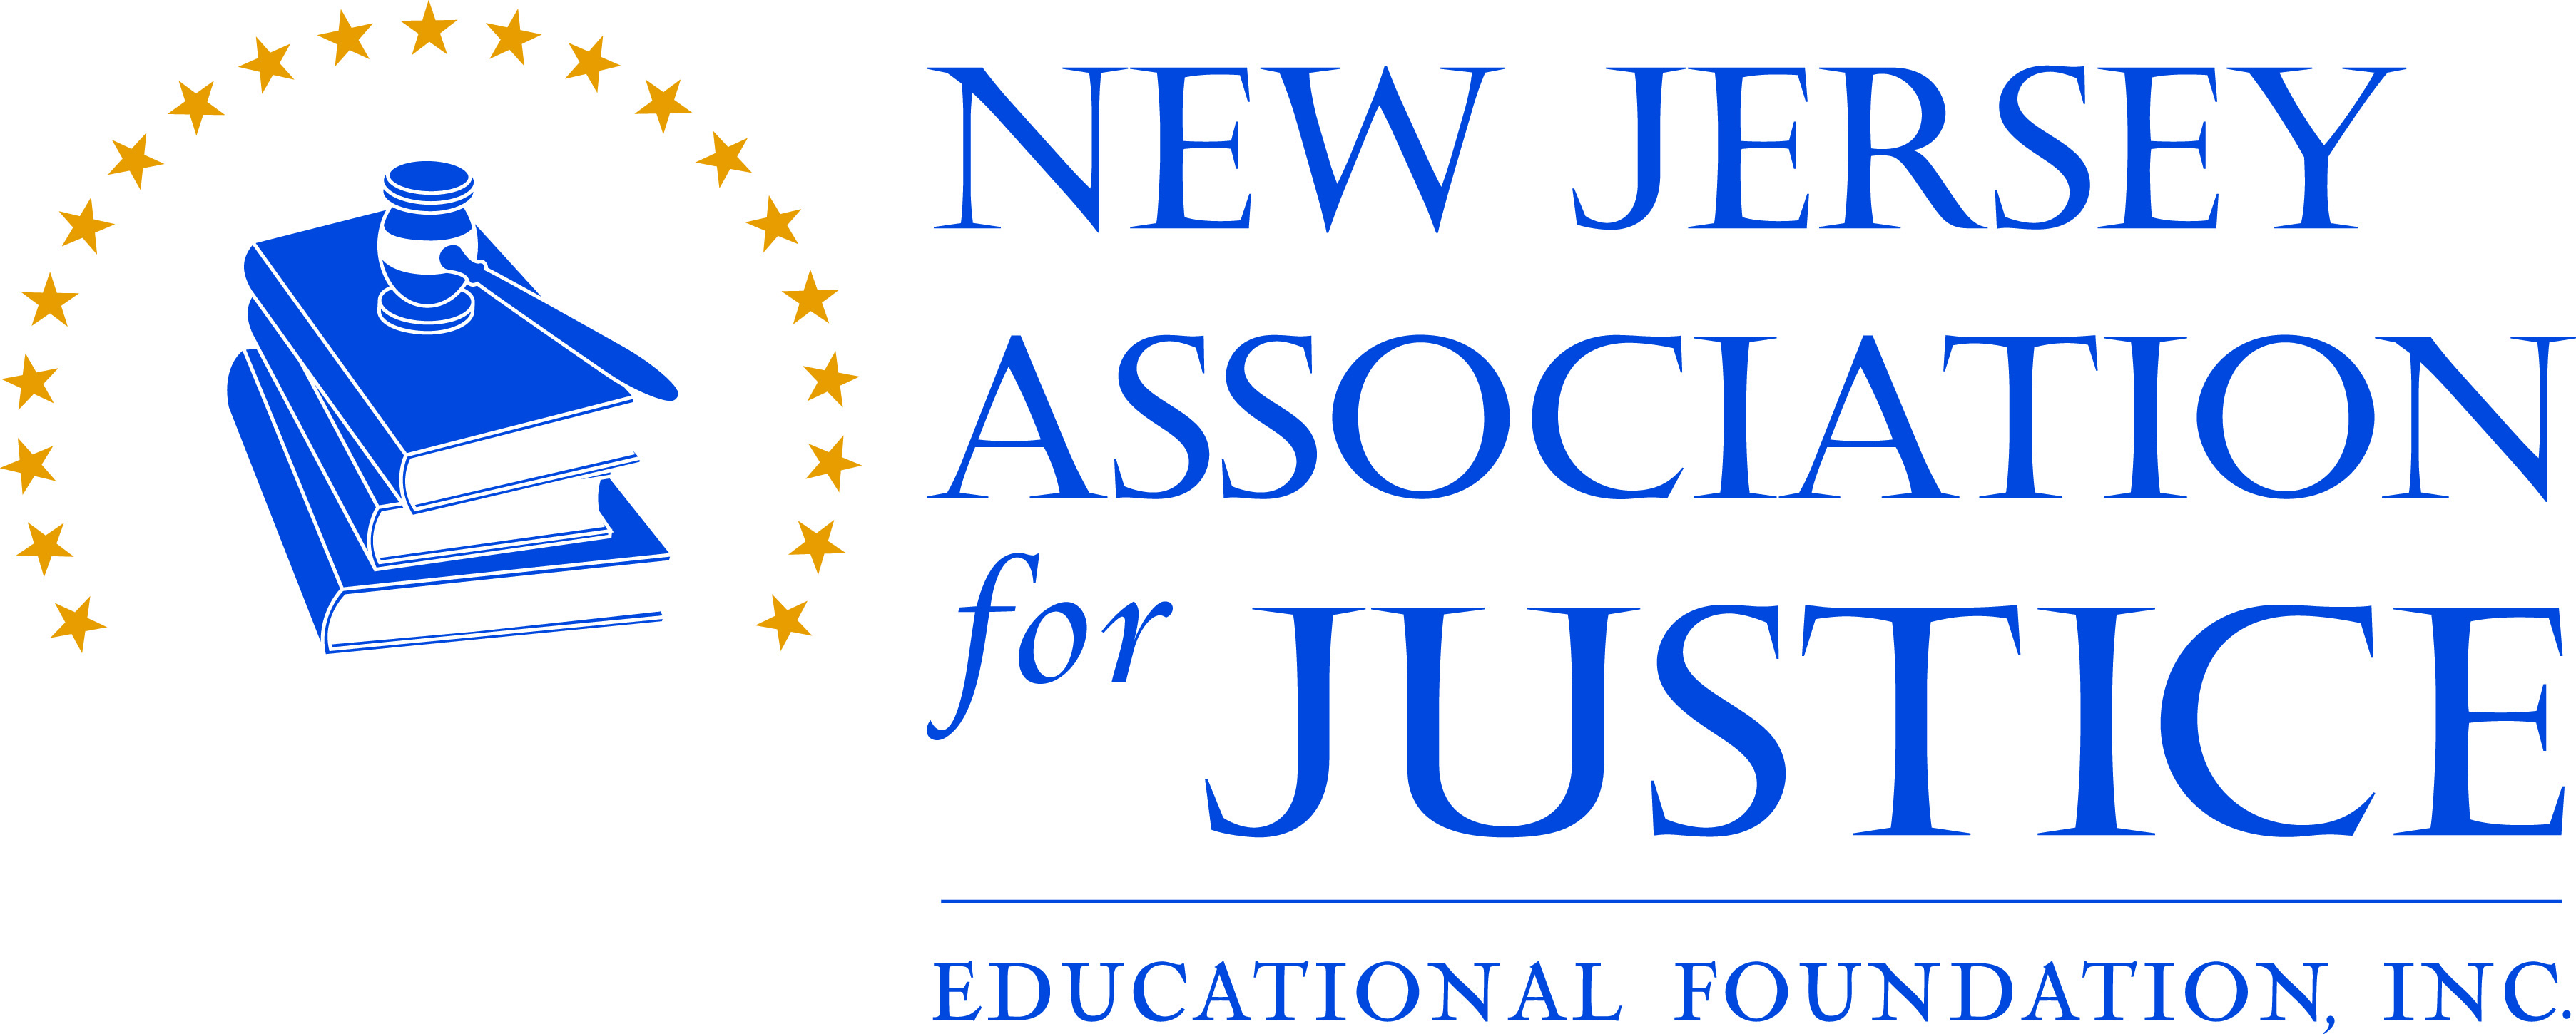 New Jersey Association for Justice Educational Foundation Inc.